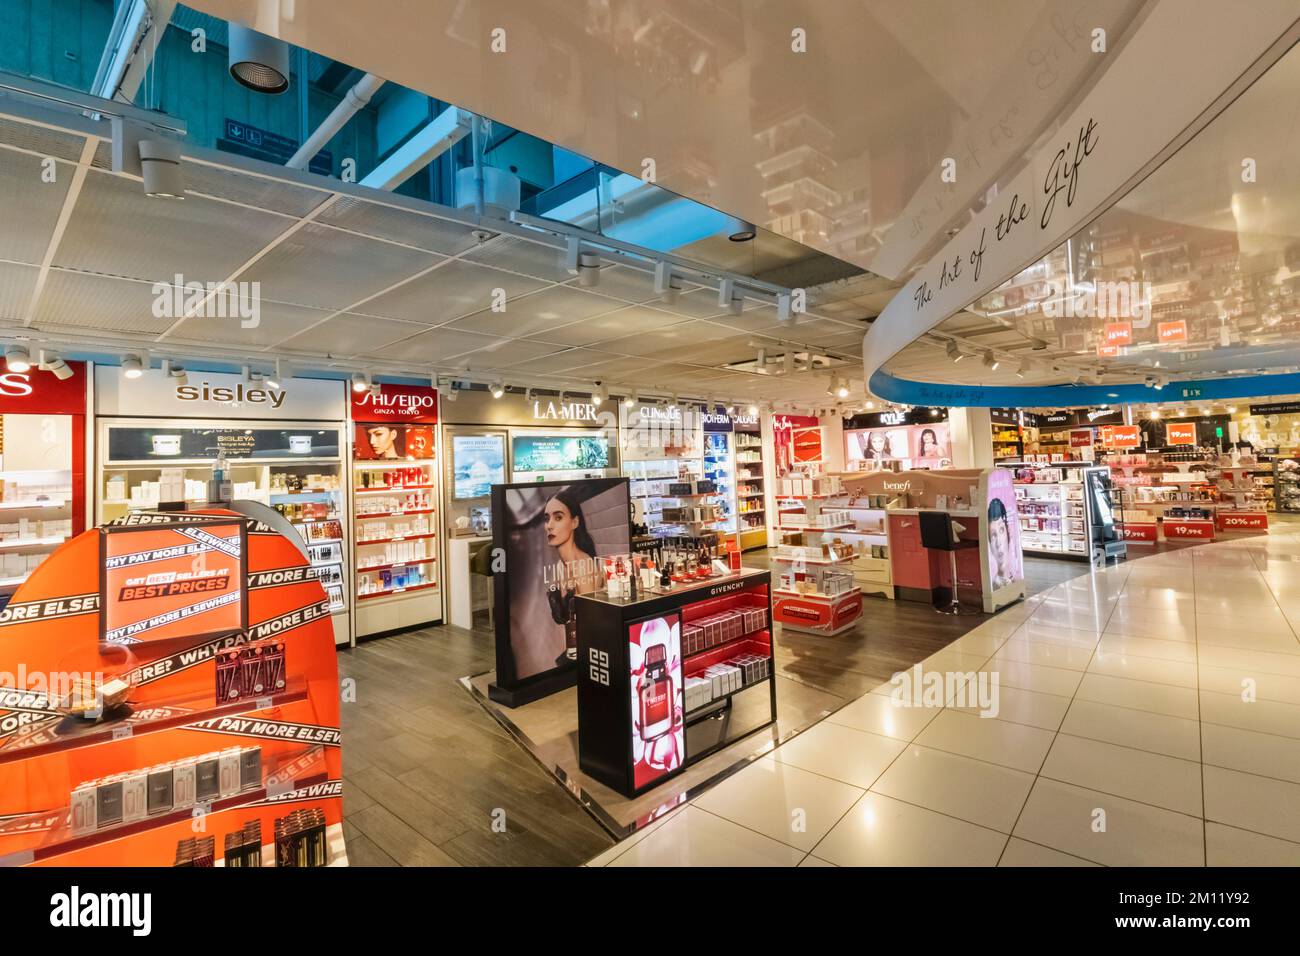 France, French Riviera, Cote d'Azur, Nice, Nice Cote d'Azur Airport, Departure Area Duty Free Shops Stock Photo